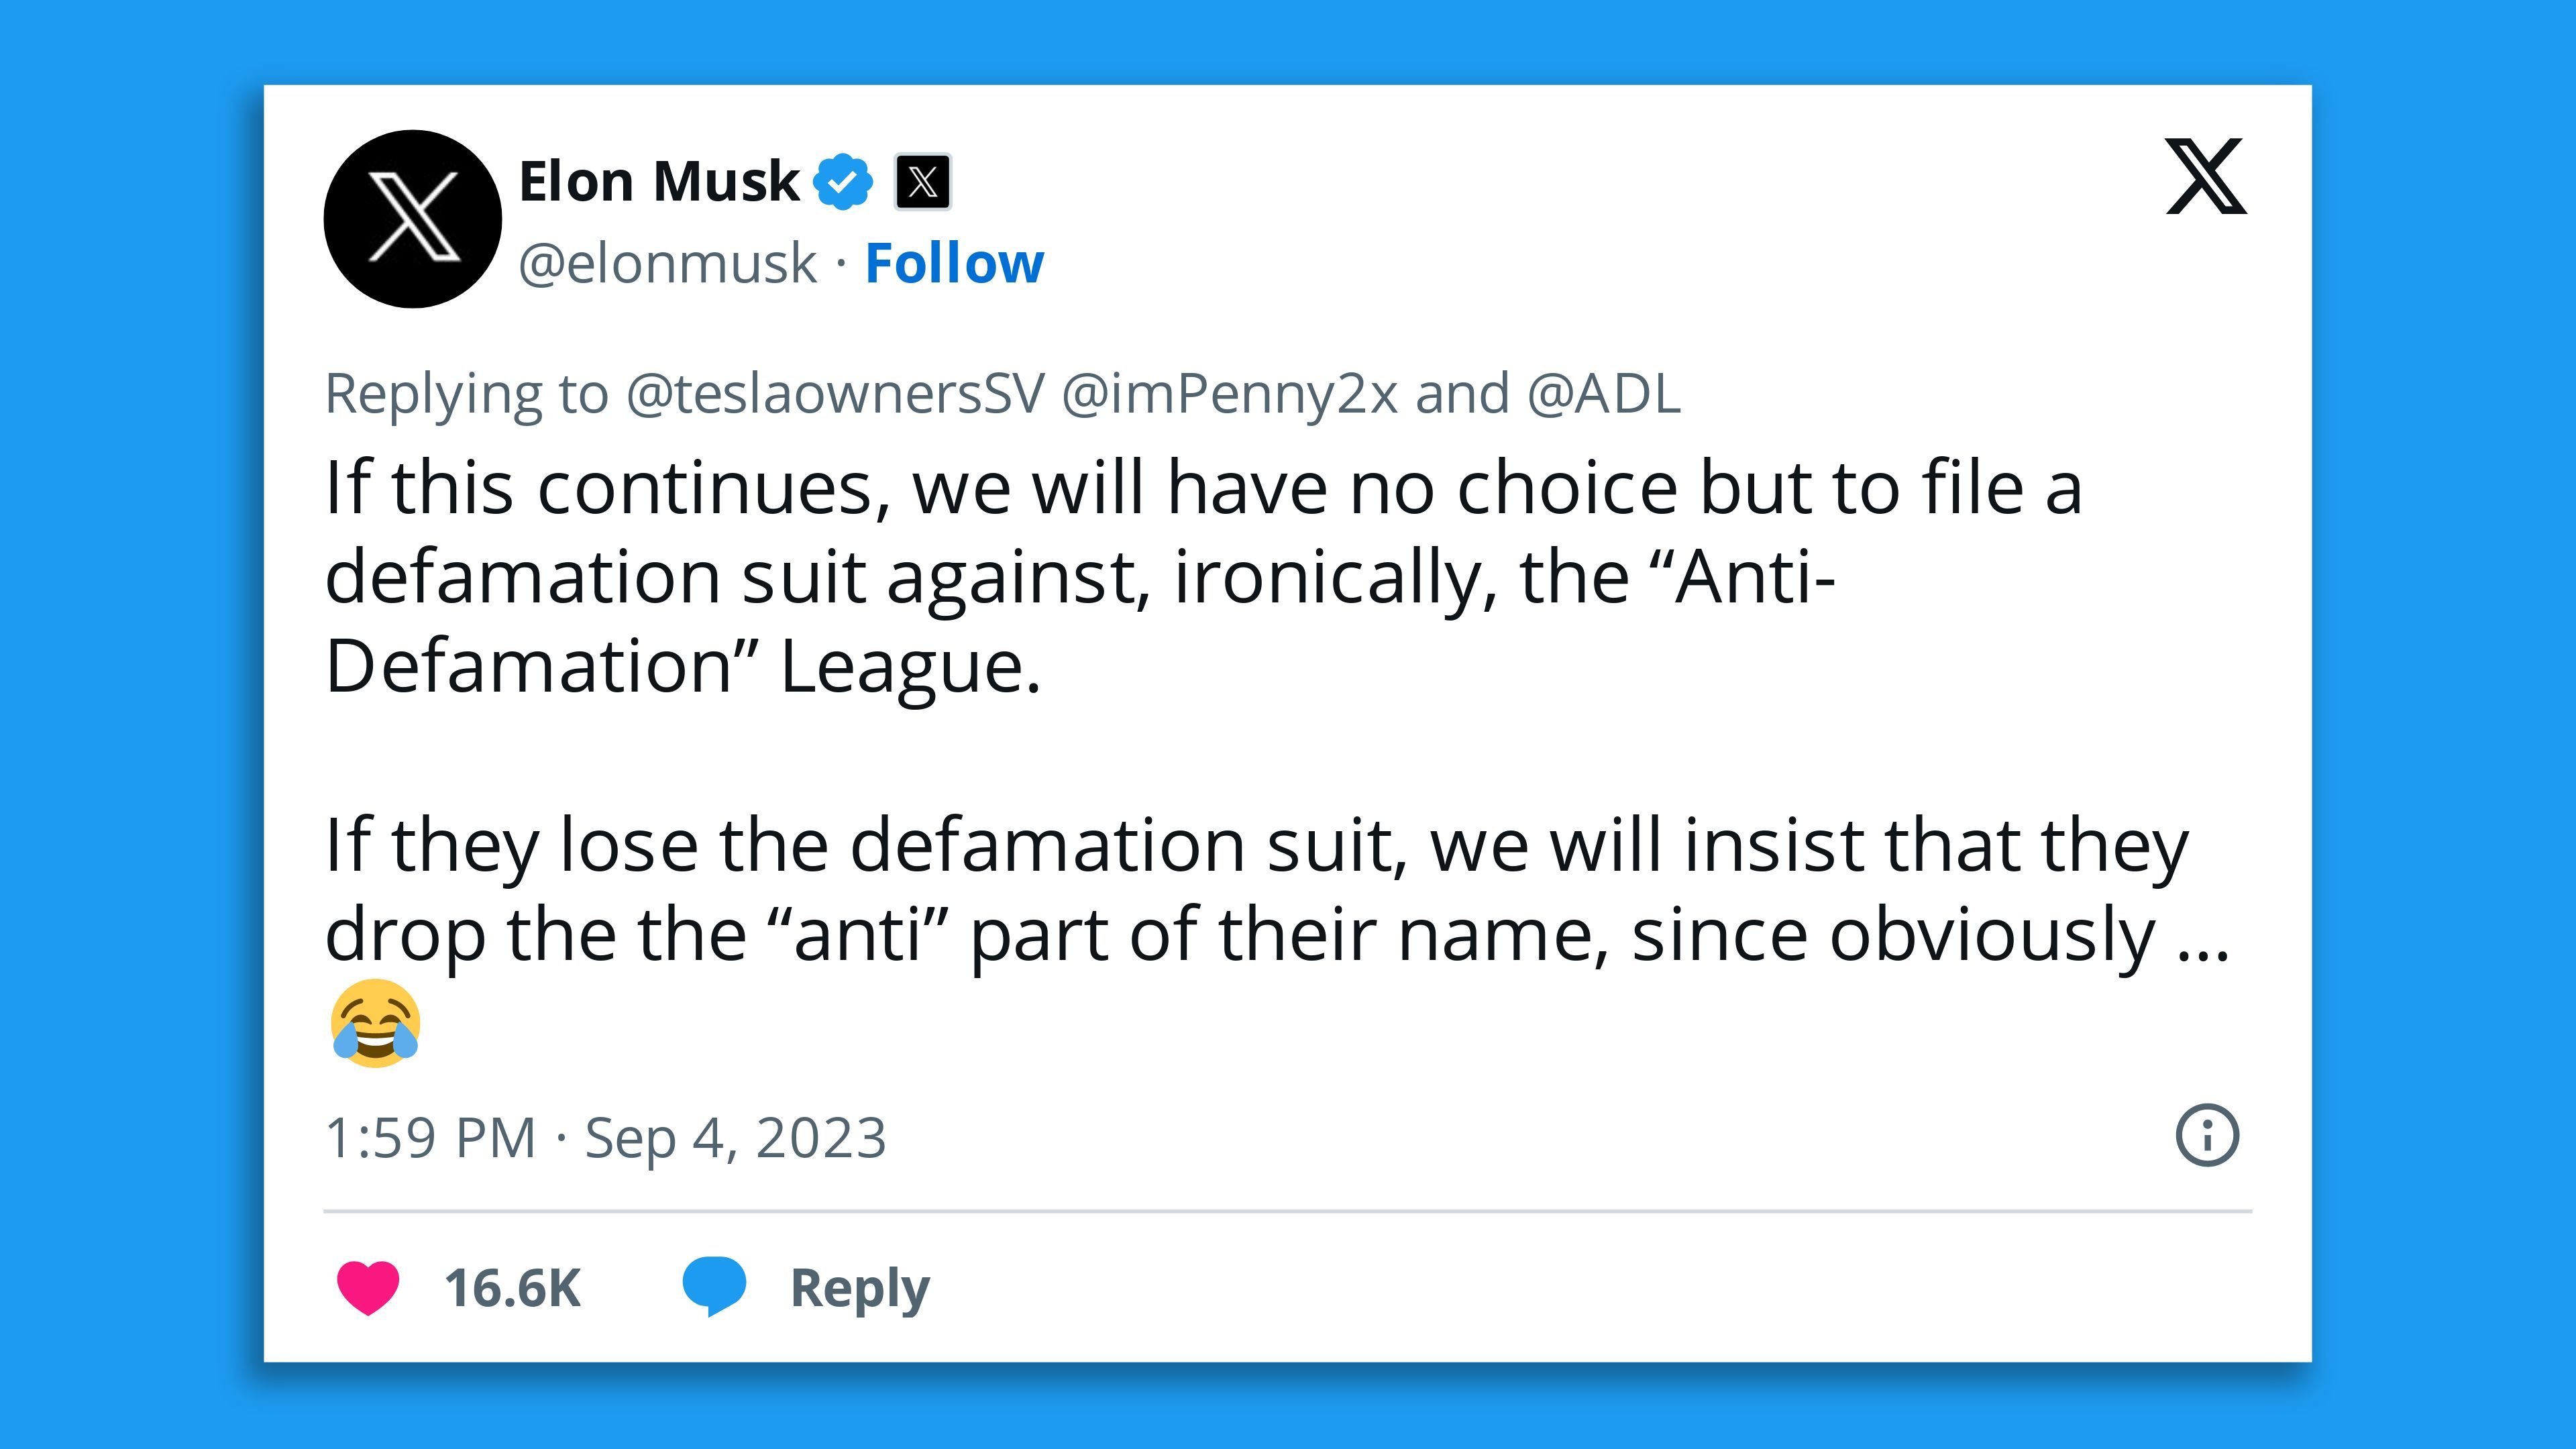 A screenshot of a tweet by Elon Musk, saying: "If this continues, we will have no choice but to file a defamation suit against, ironically, the “Anti-Defamation” League.  If they lose the defamation suit, we will insist that they drop the the “anti” part of their name, since obviously … 😂"